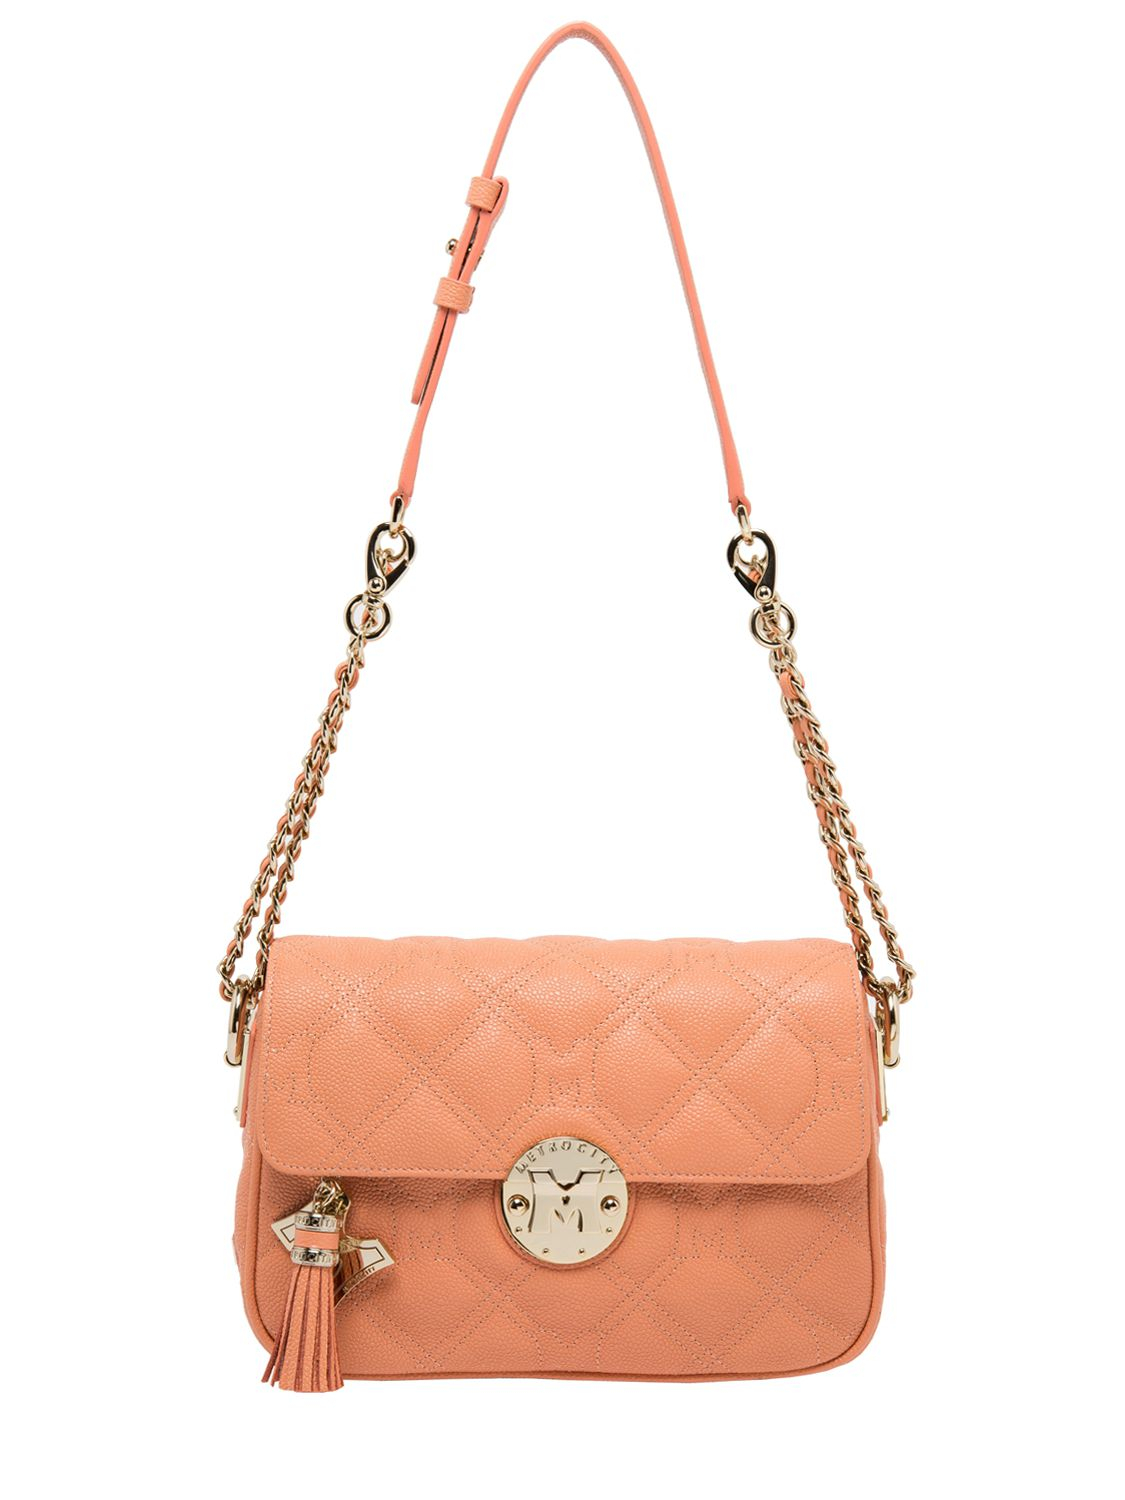 Metrocity Quilted Leather Shoulder Bag in Pink (LIGHT PINK) | Lyst